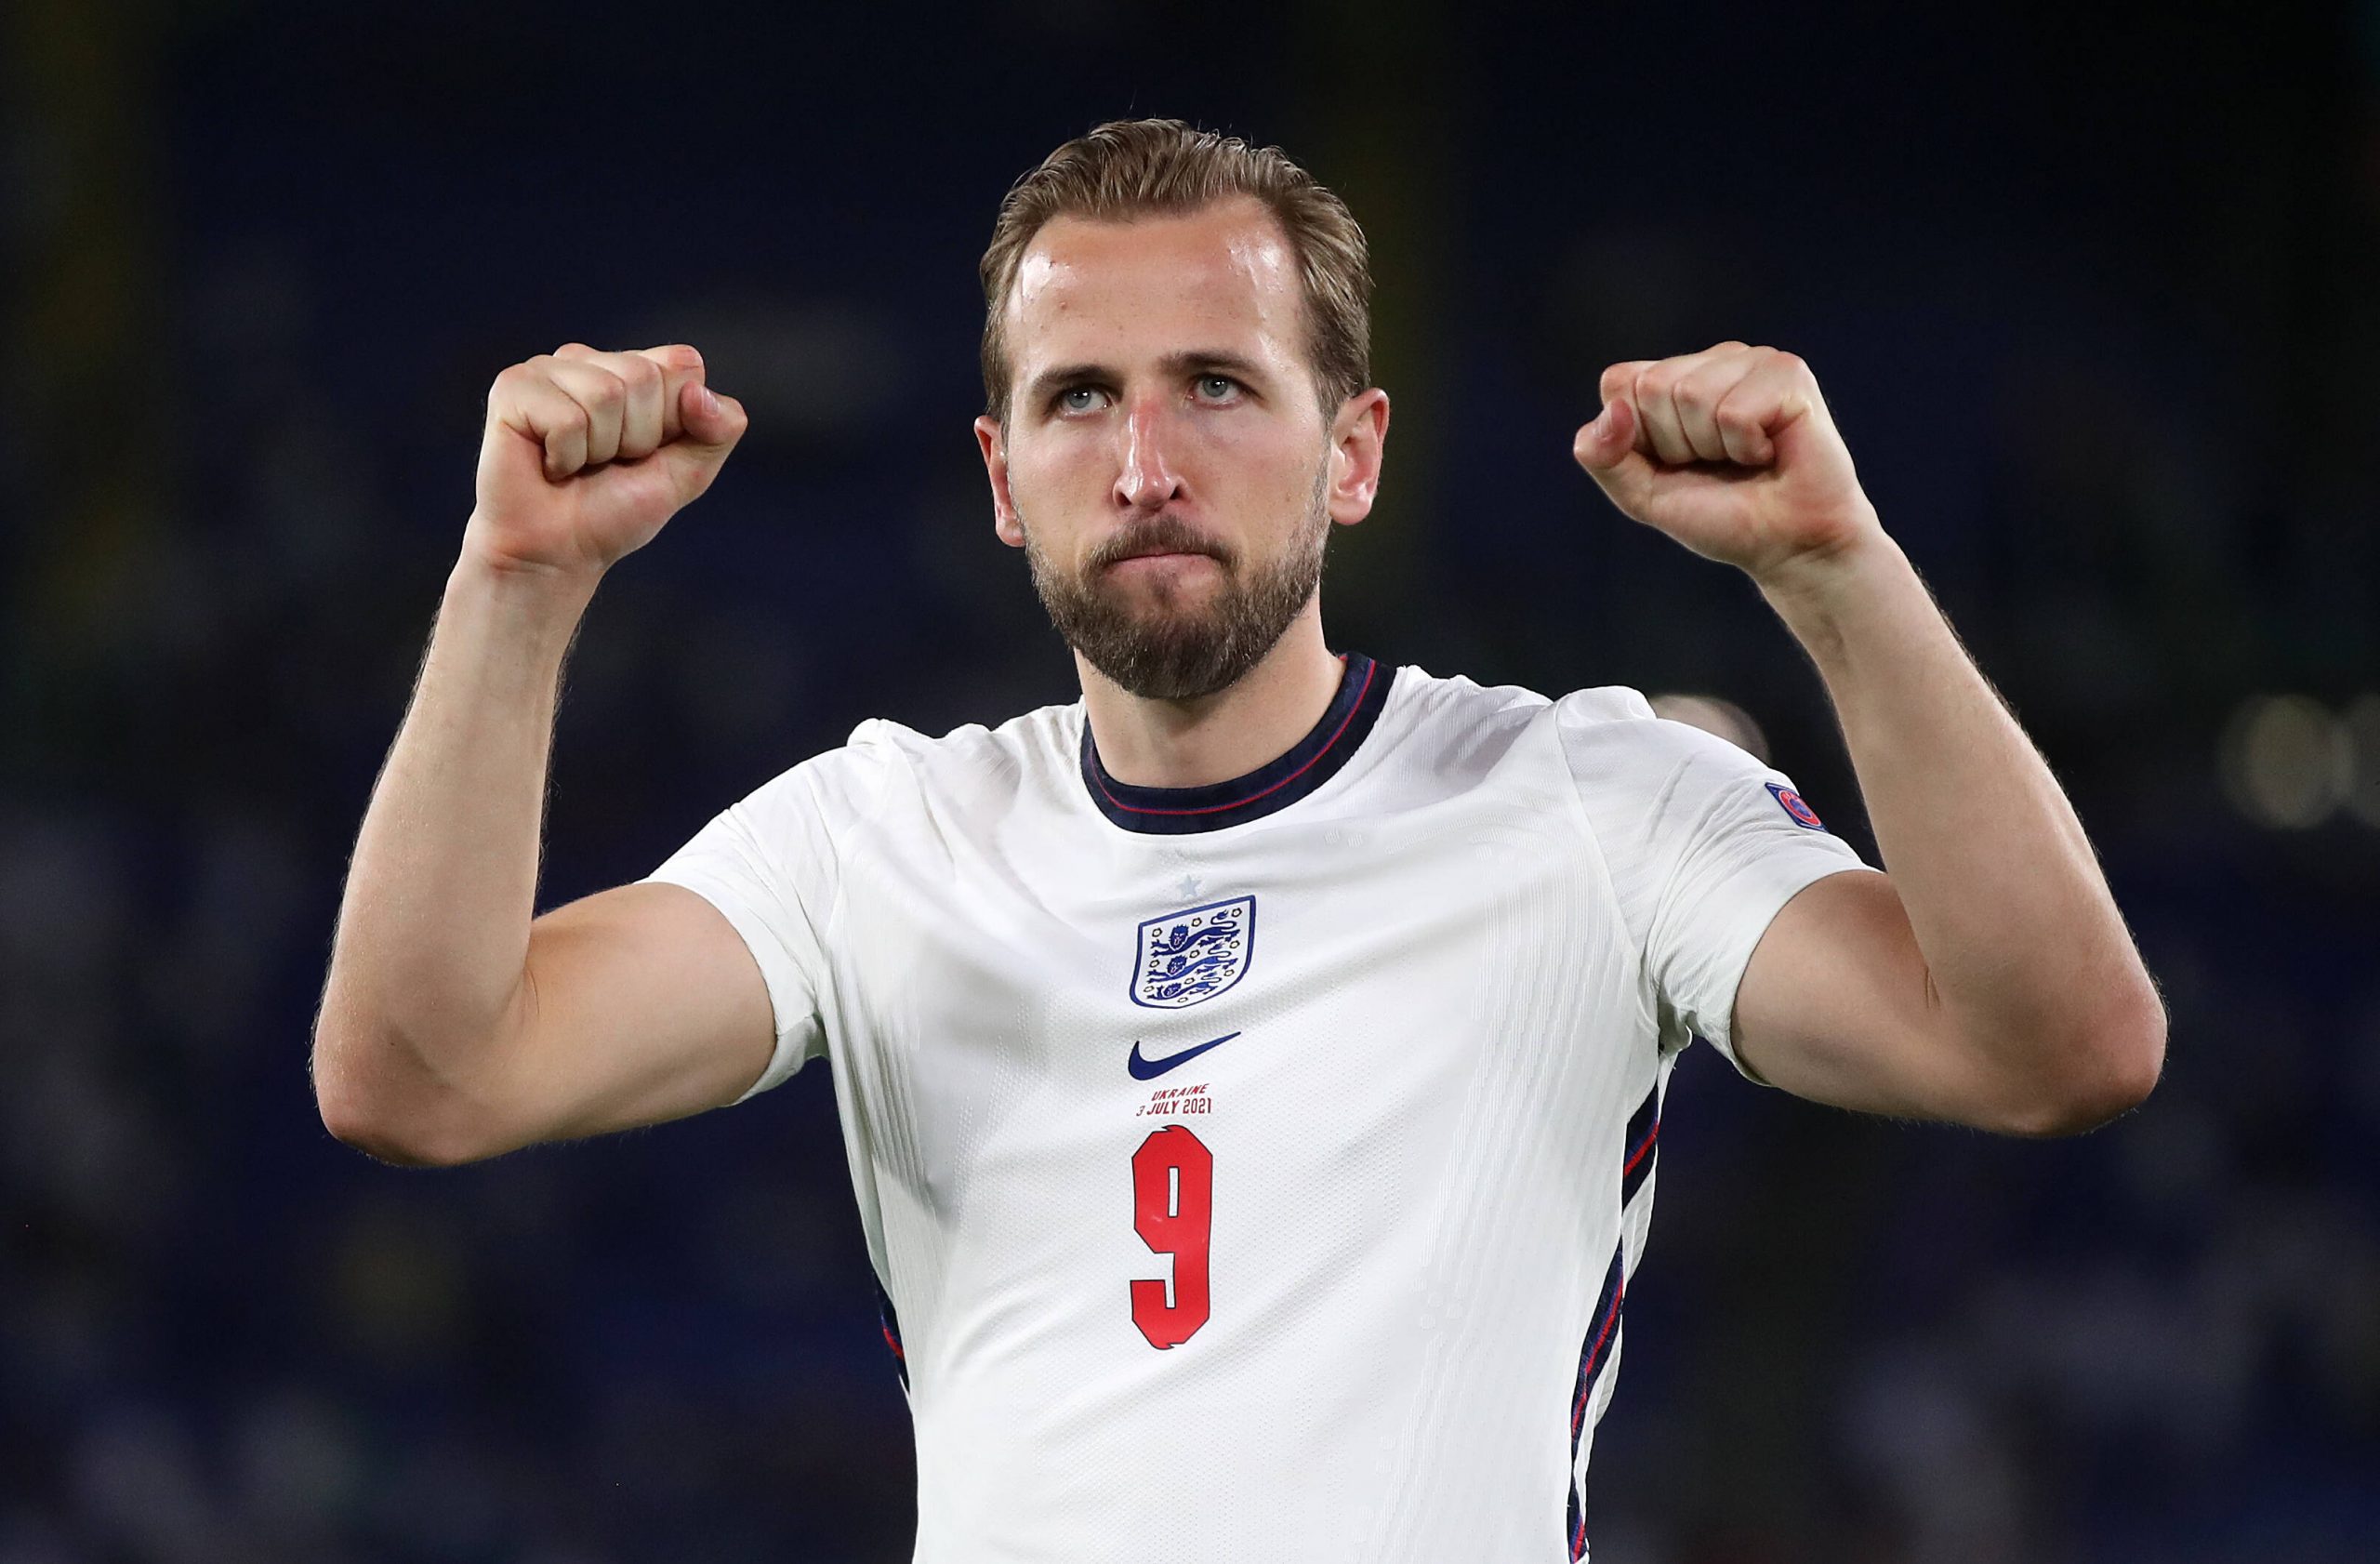 Harry Kane is the main man for England and Tottenham Hotspur.